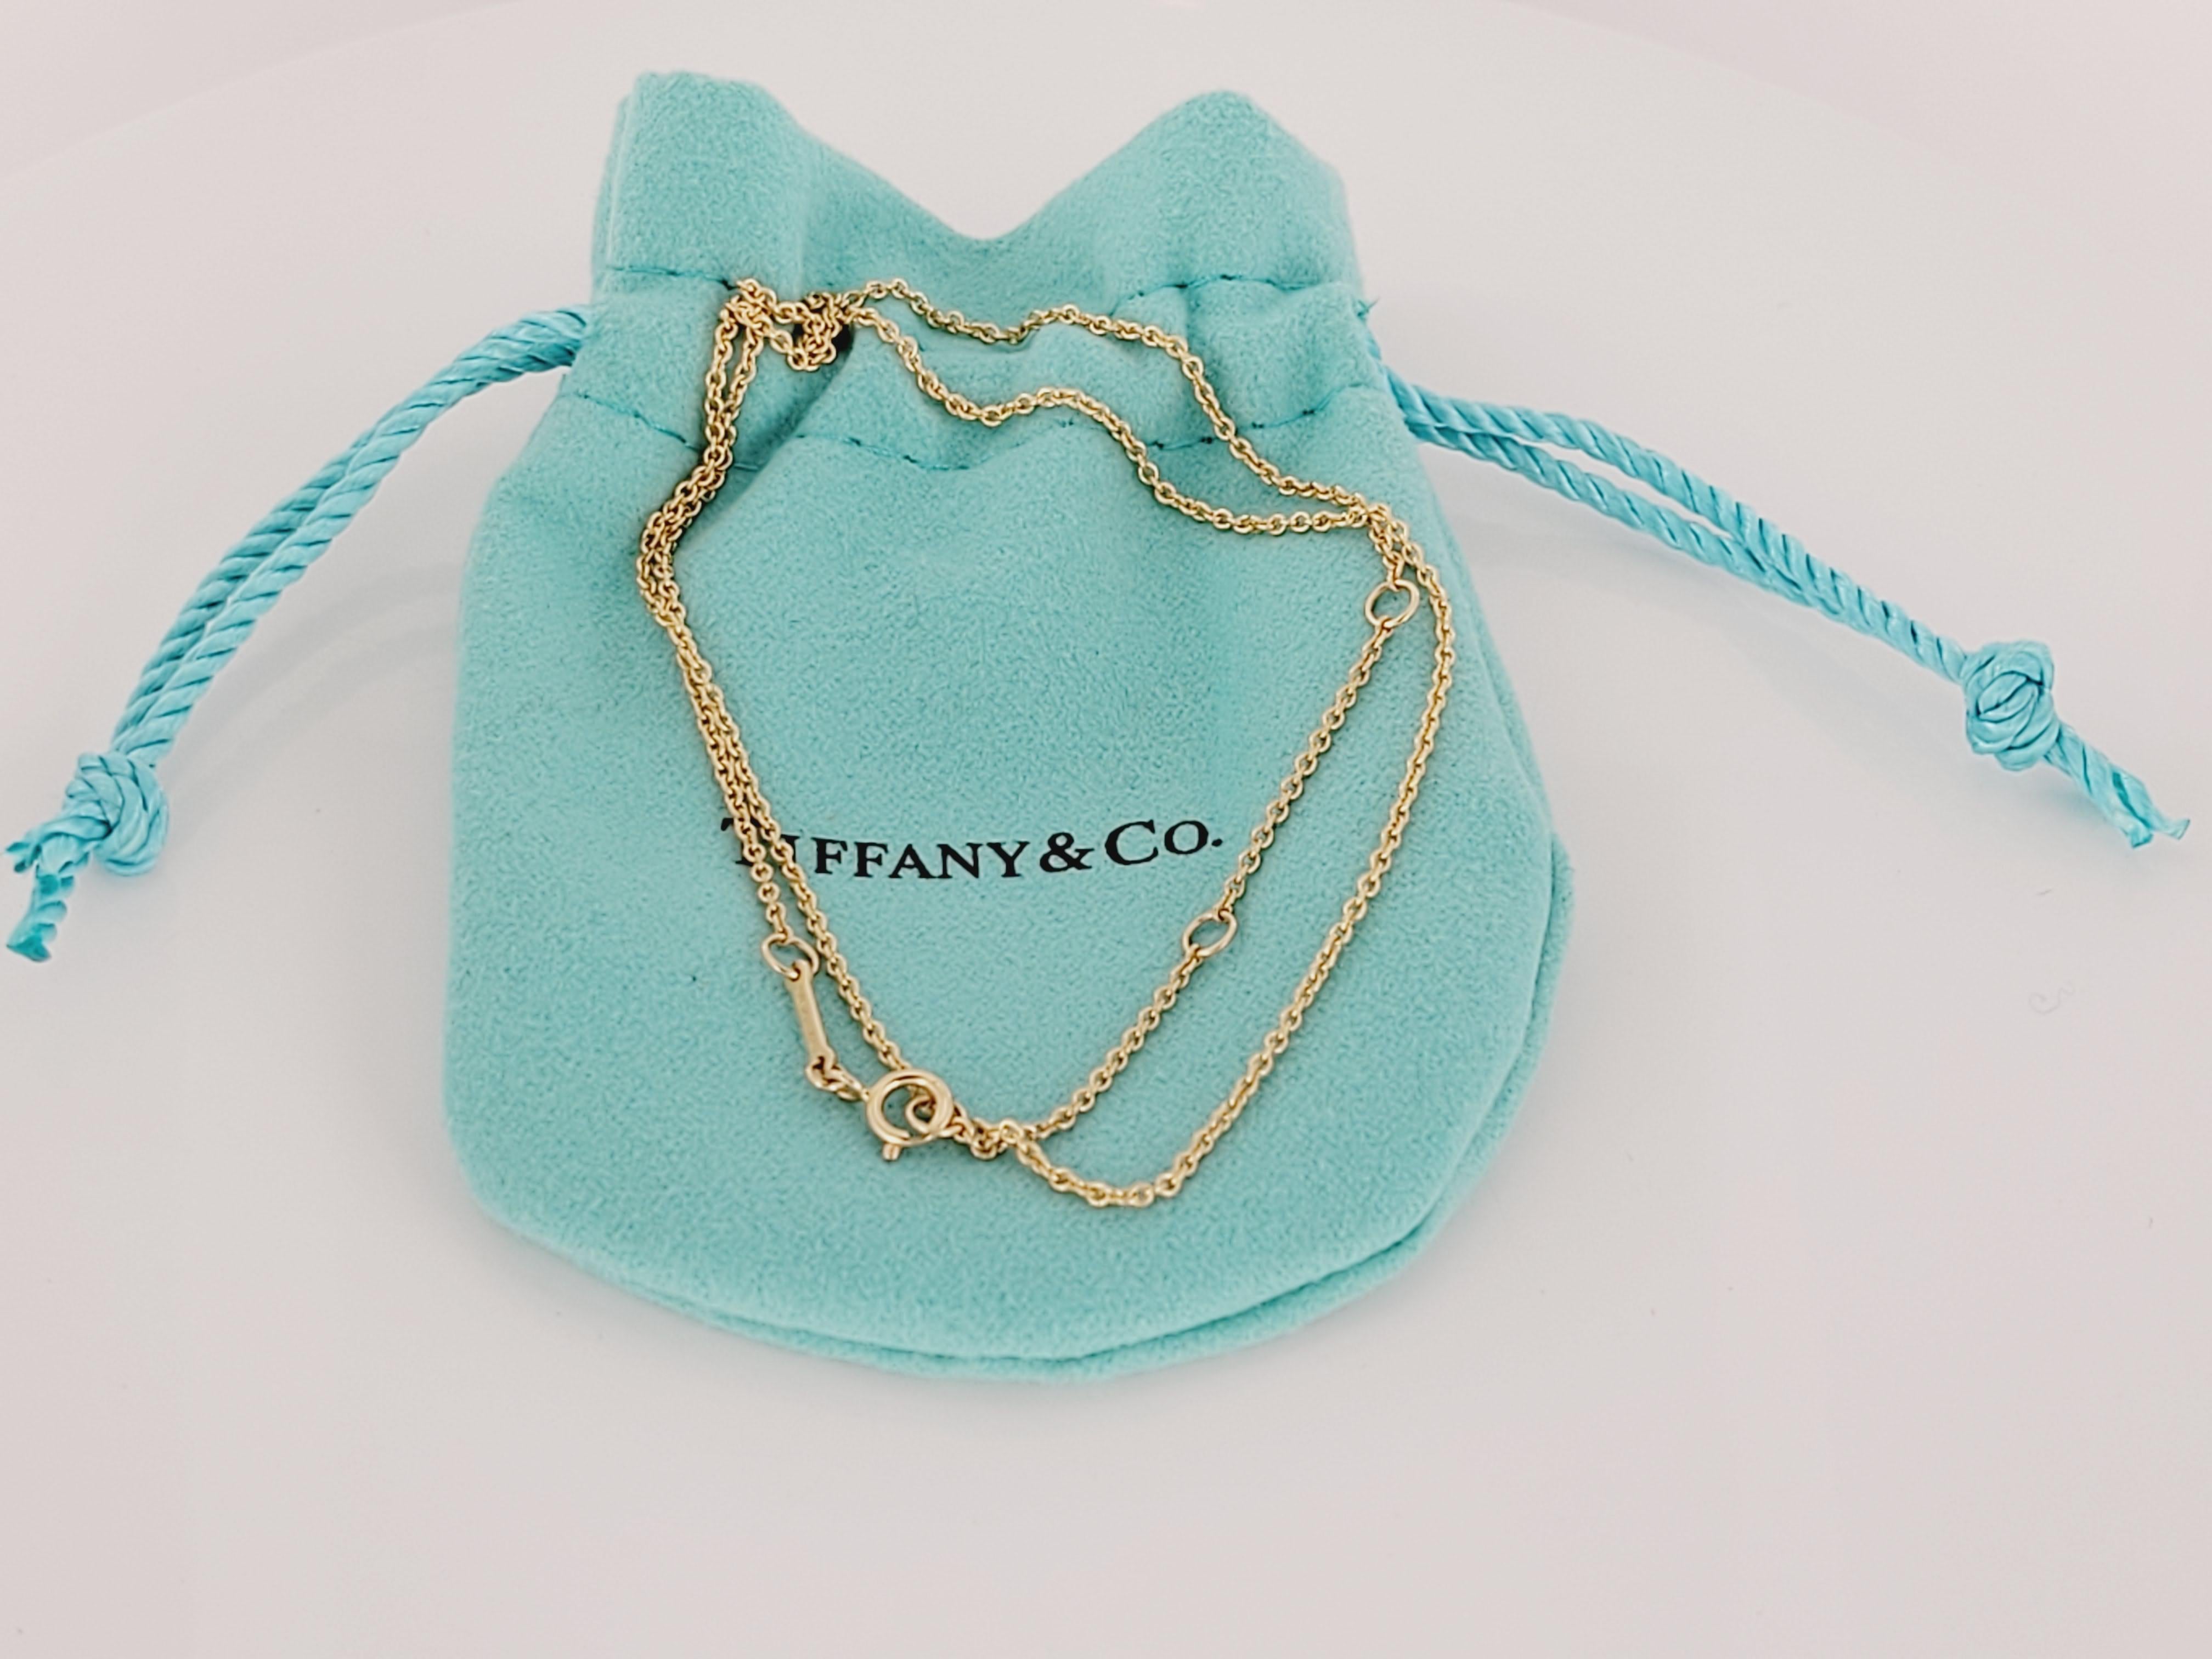 Paloma Picasso Tiffany & co
Material 18K Yellow gold
Chain Length 16'' Long
Chain is Adjustable 16'' 15'' 14'' 
Weight 2.4gr
Condition New, Never worn
Comes with Tiffany & co pouch